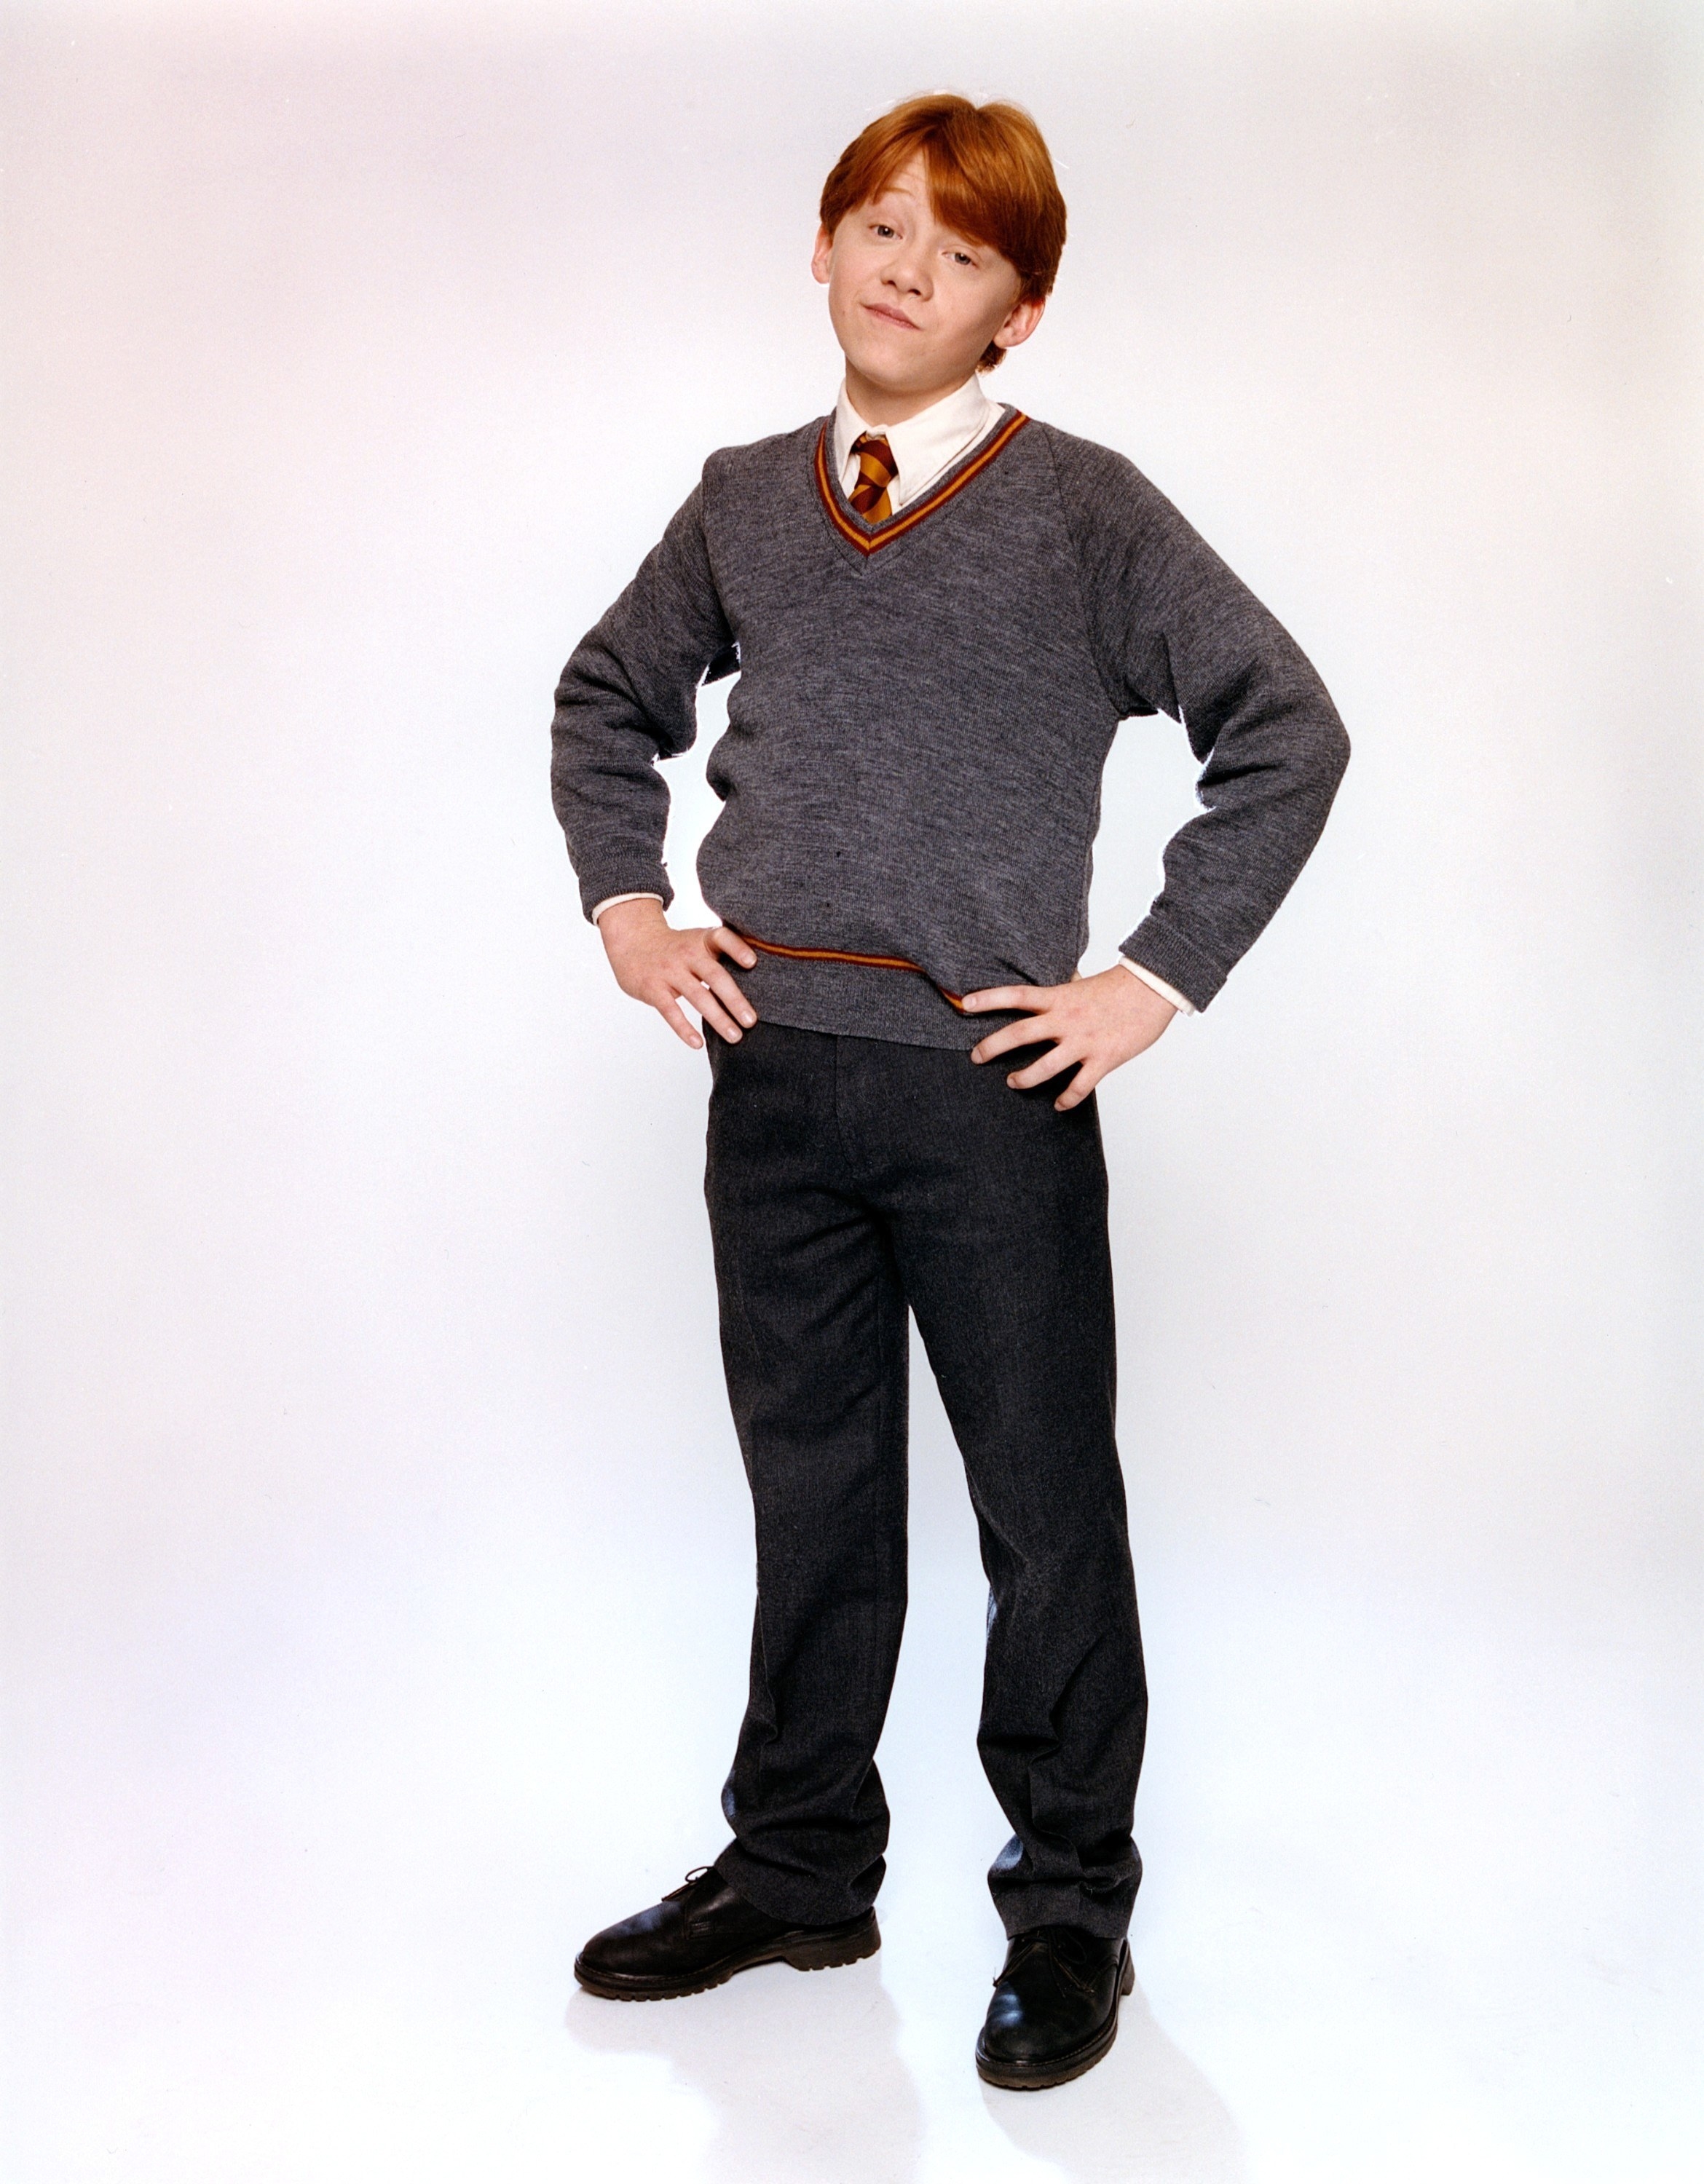 A promo shot of Rupert as Ron Weasley in school uniform. Ron has his hands on his hips